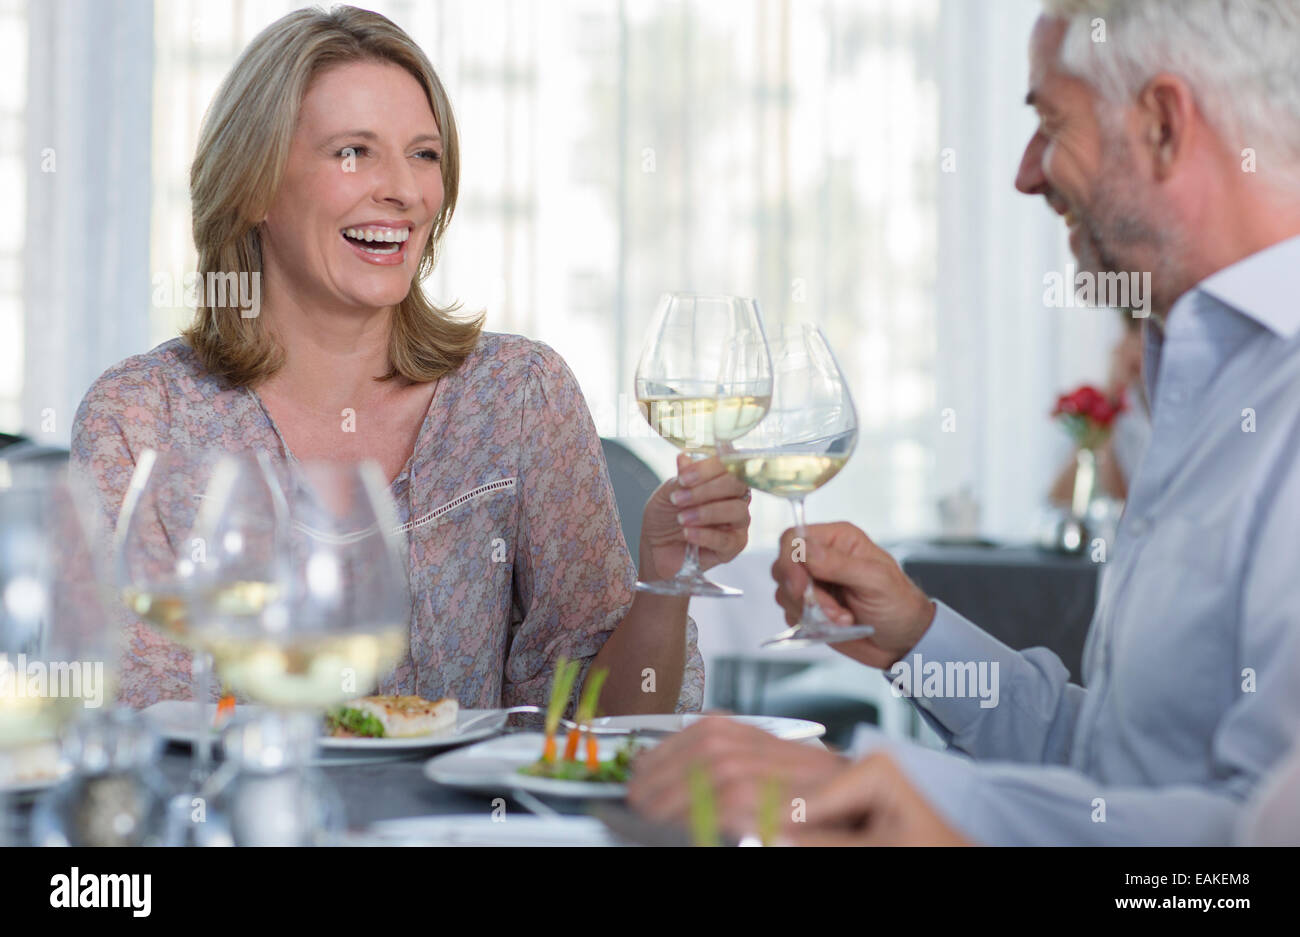 Smiling mature woman and man toasting with white wine at restaurant table Stock Photo